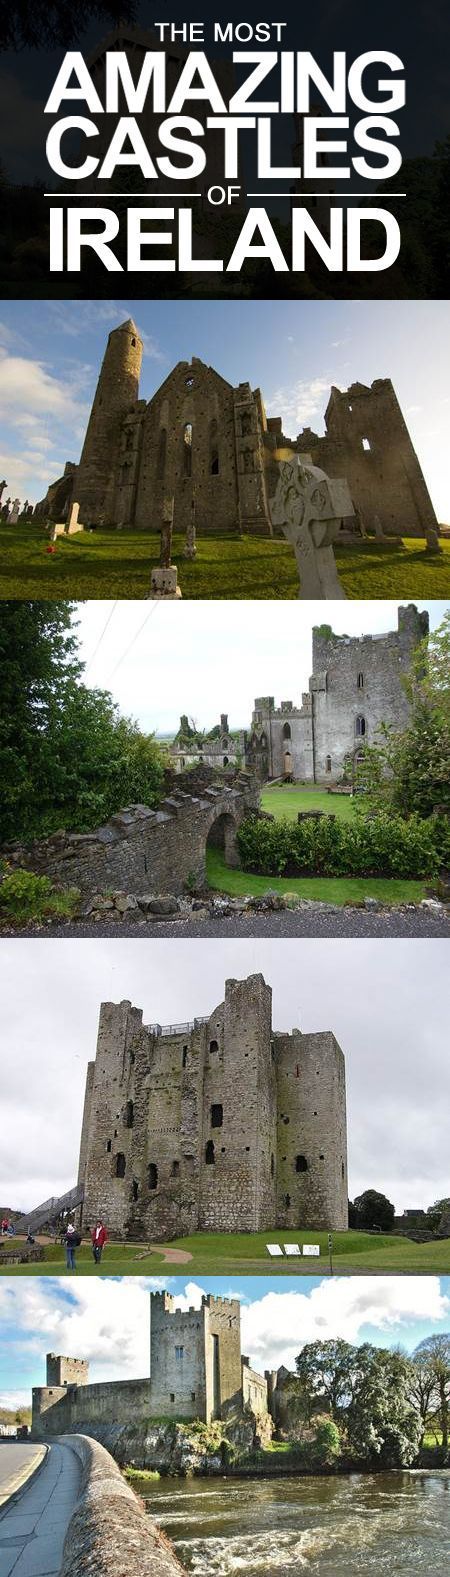 The Most Amazing Castles in Ireland (not to be confused with the boring, run-of-the-mill castles in Ir